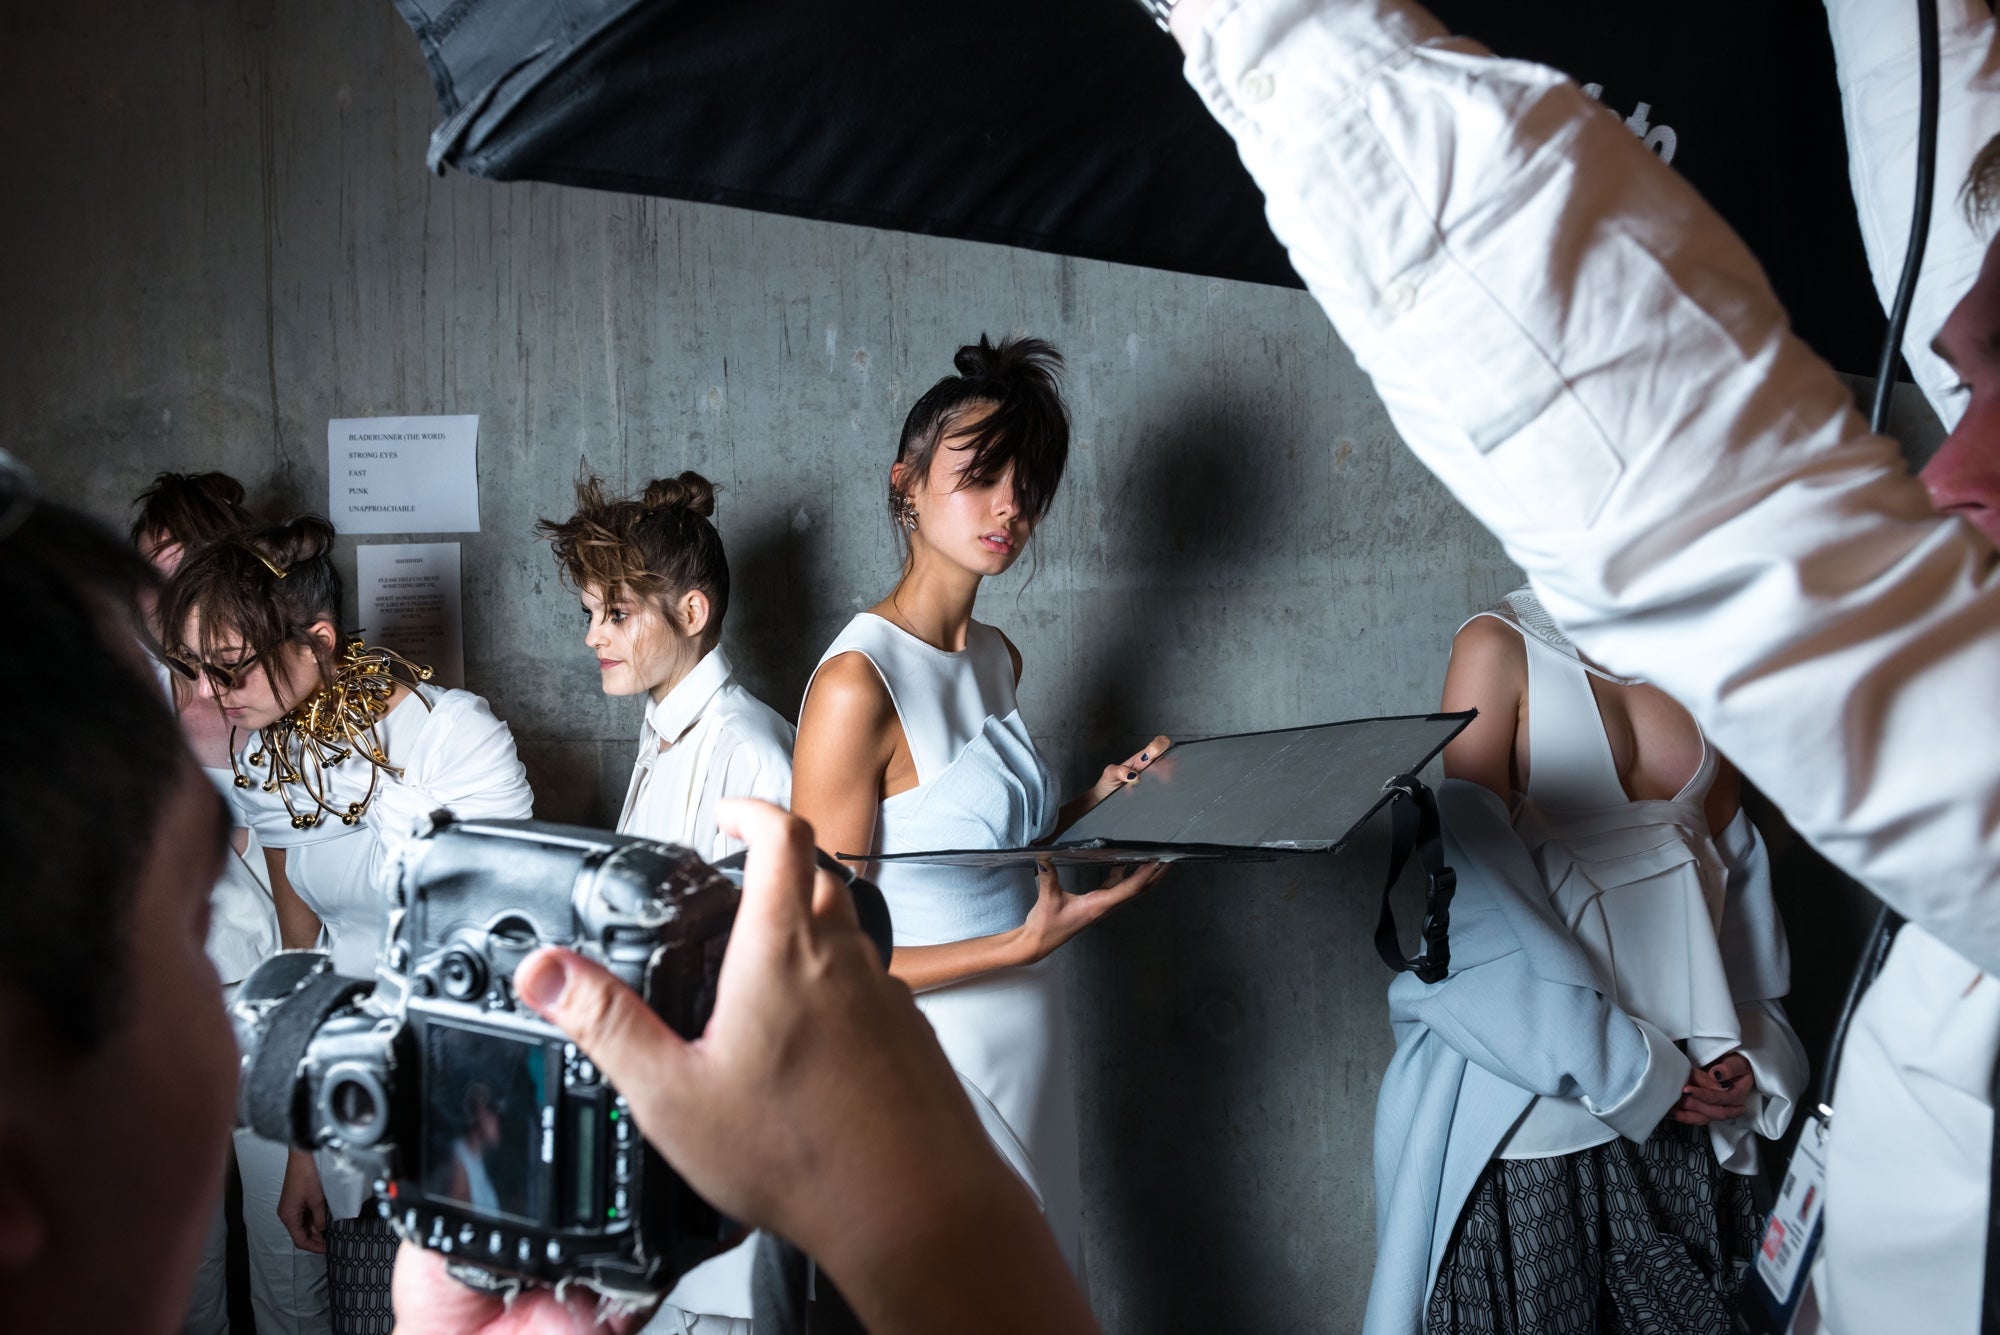 Models prepare for a runway show backstage